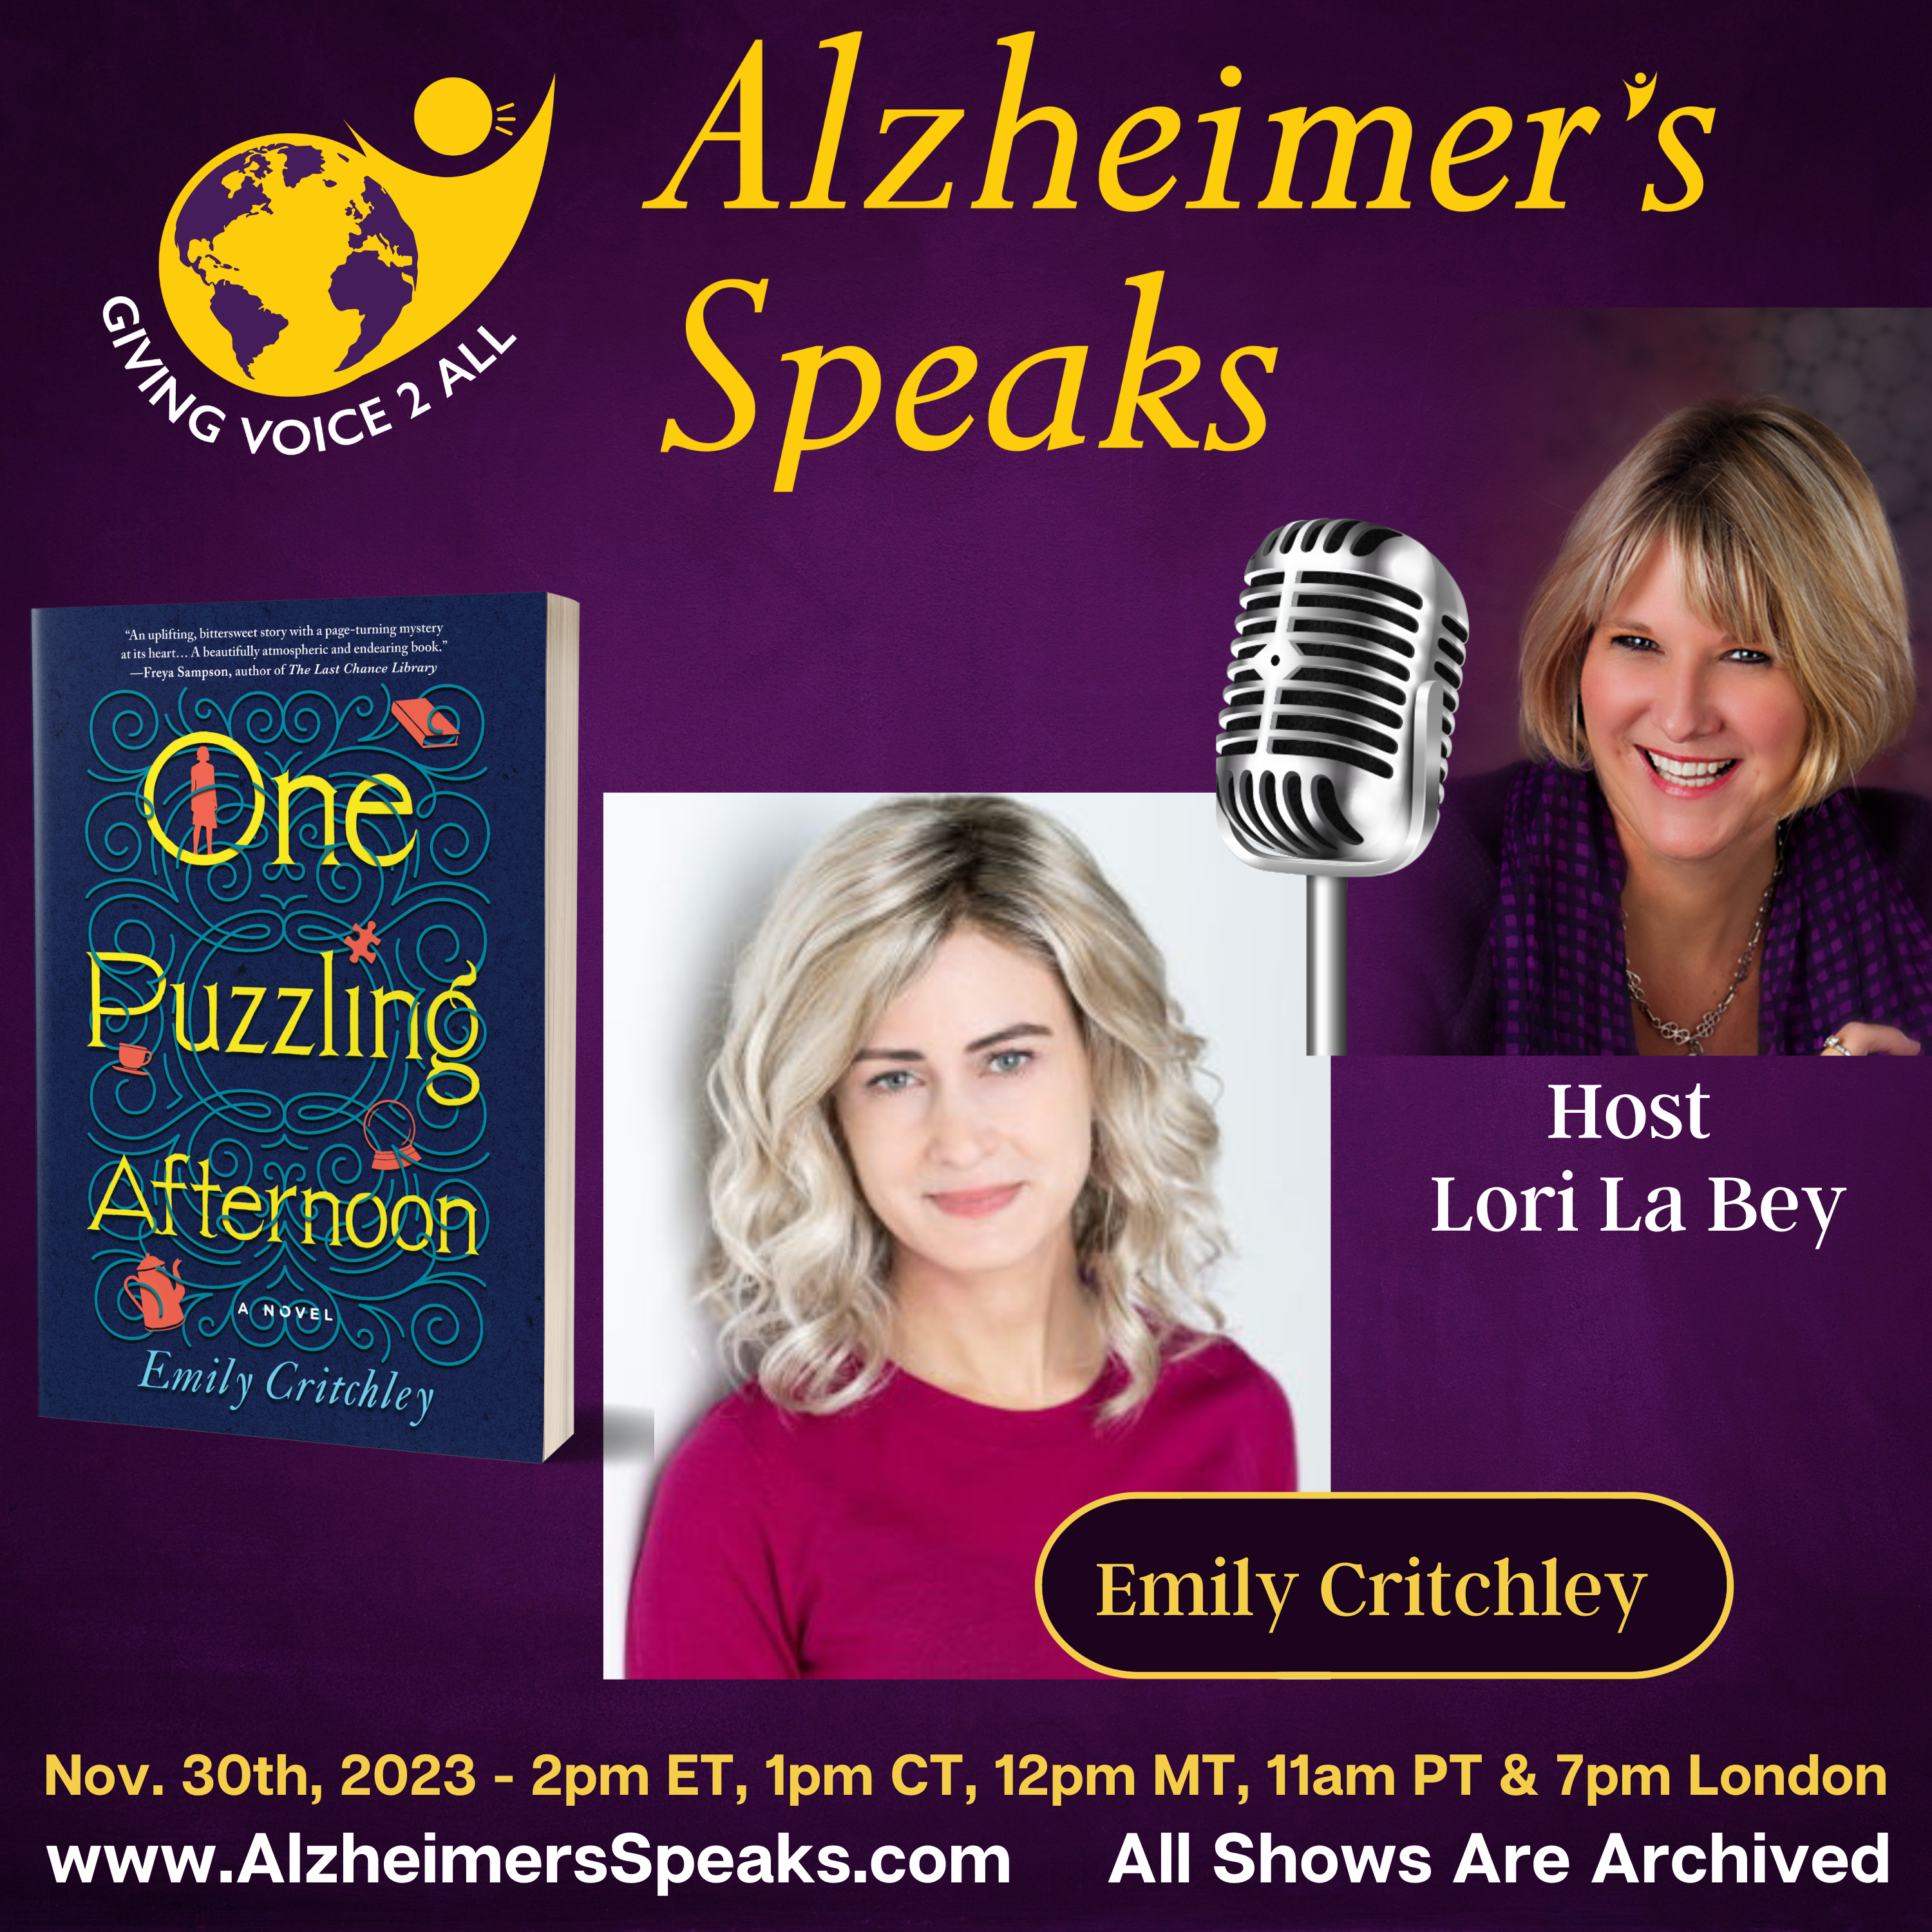 Alzheimer's in Fiction: ONE PUZZLING AFTERNOON by Emily Critchley